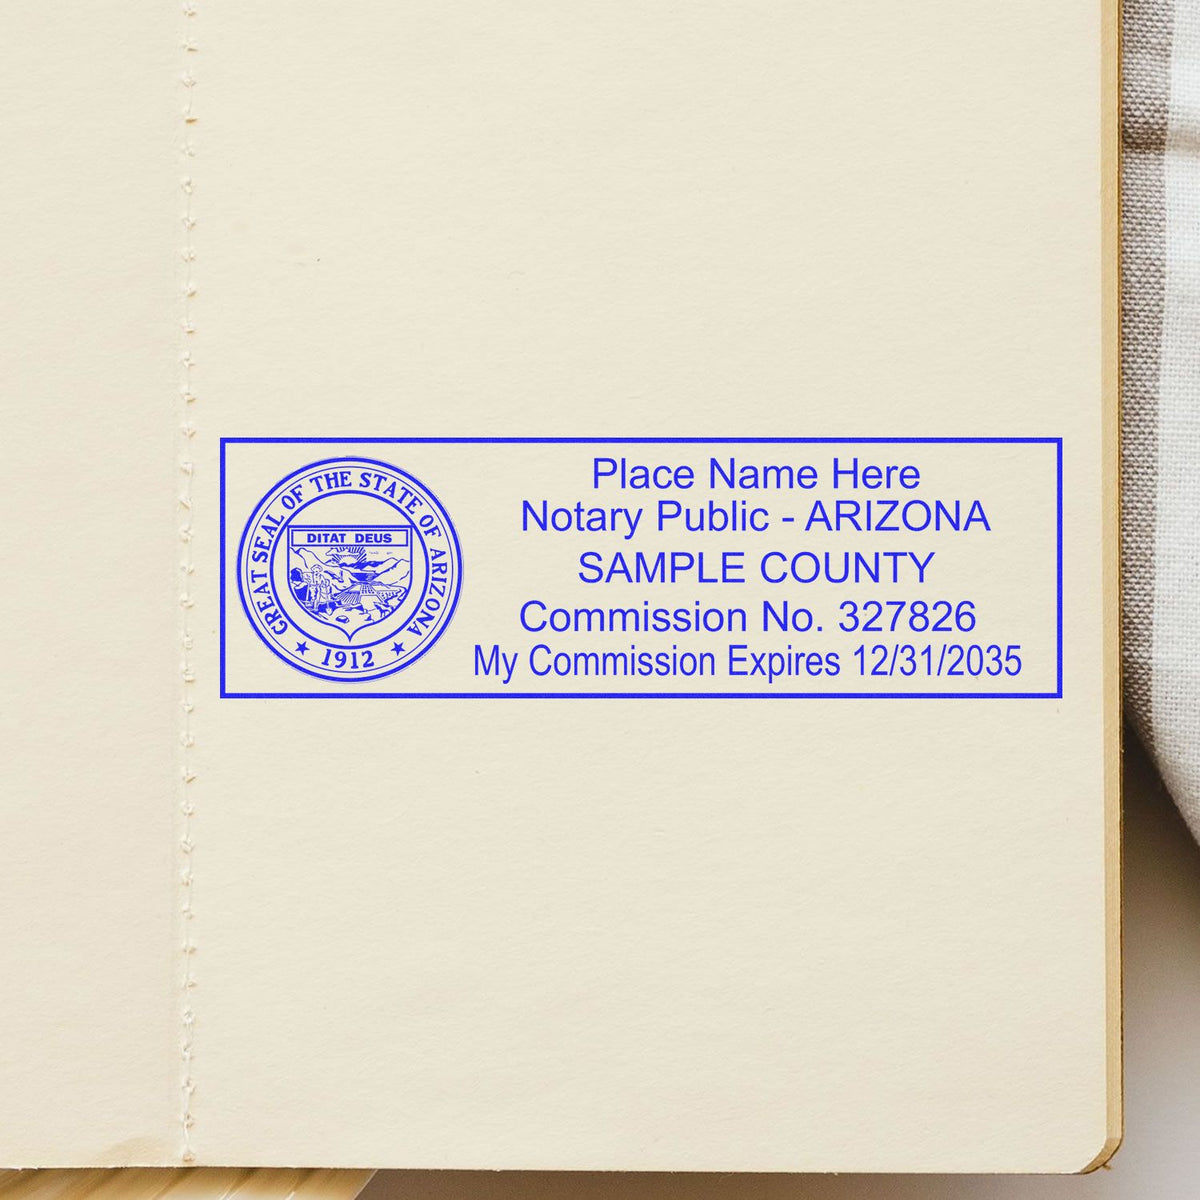 This paper is stamped with a sample imprint of the Slim Pre-Inked State Seal Notary Stamp for Arizona, signifying its quality and reliability.